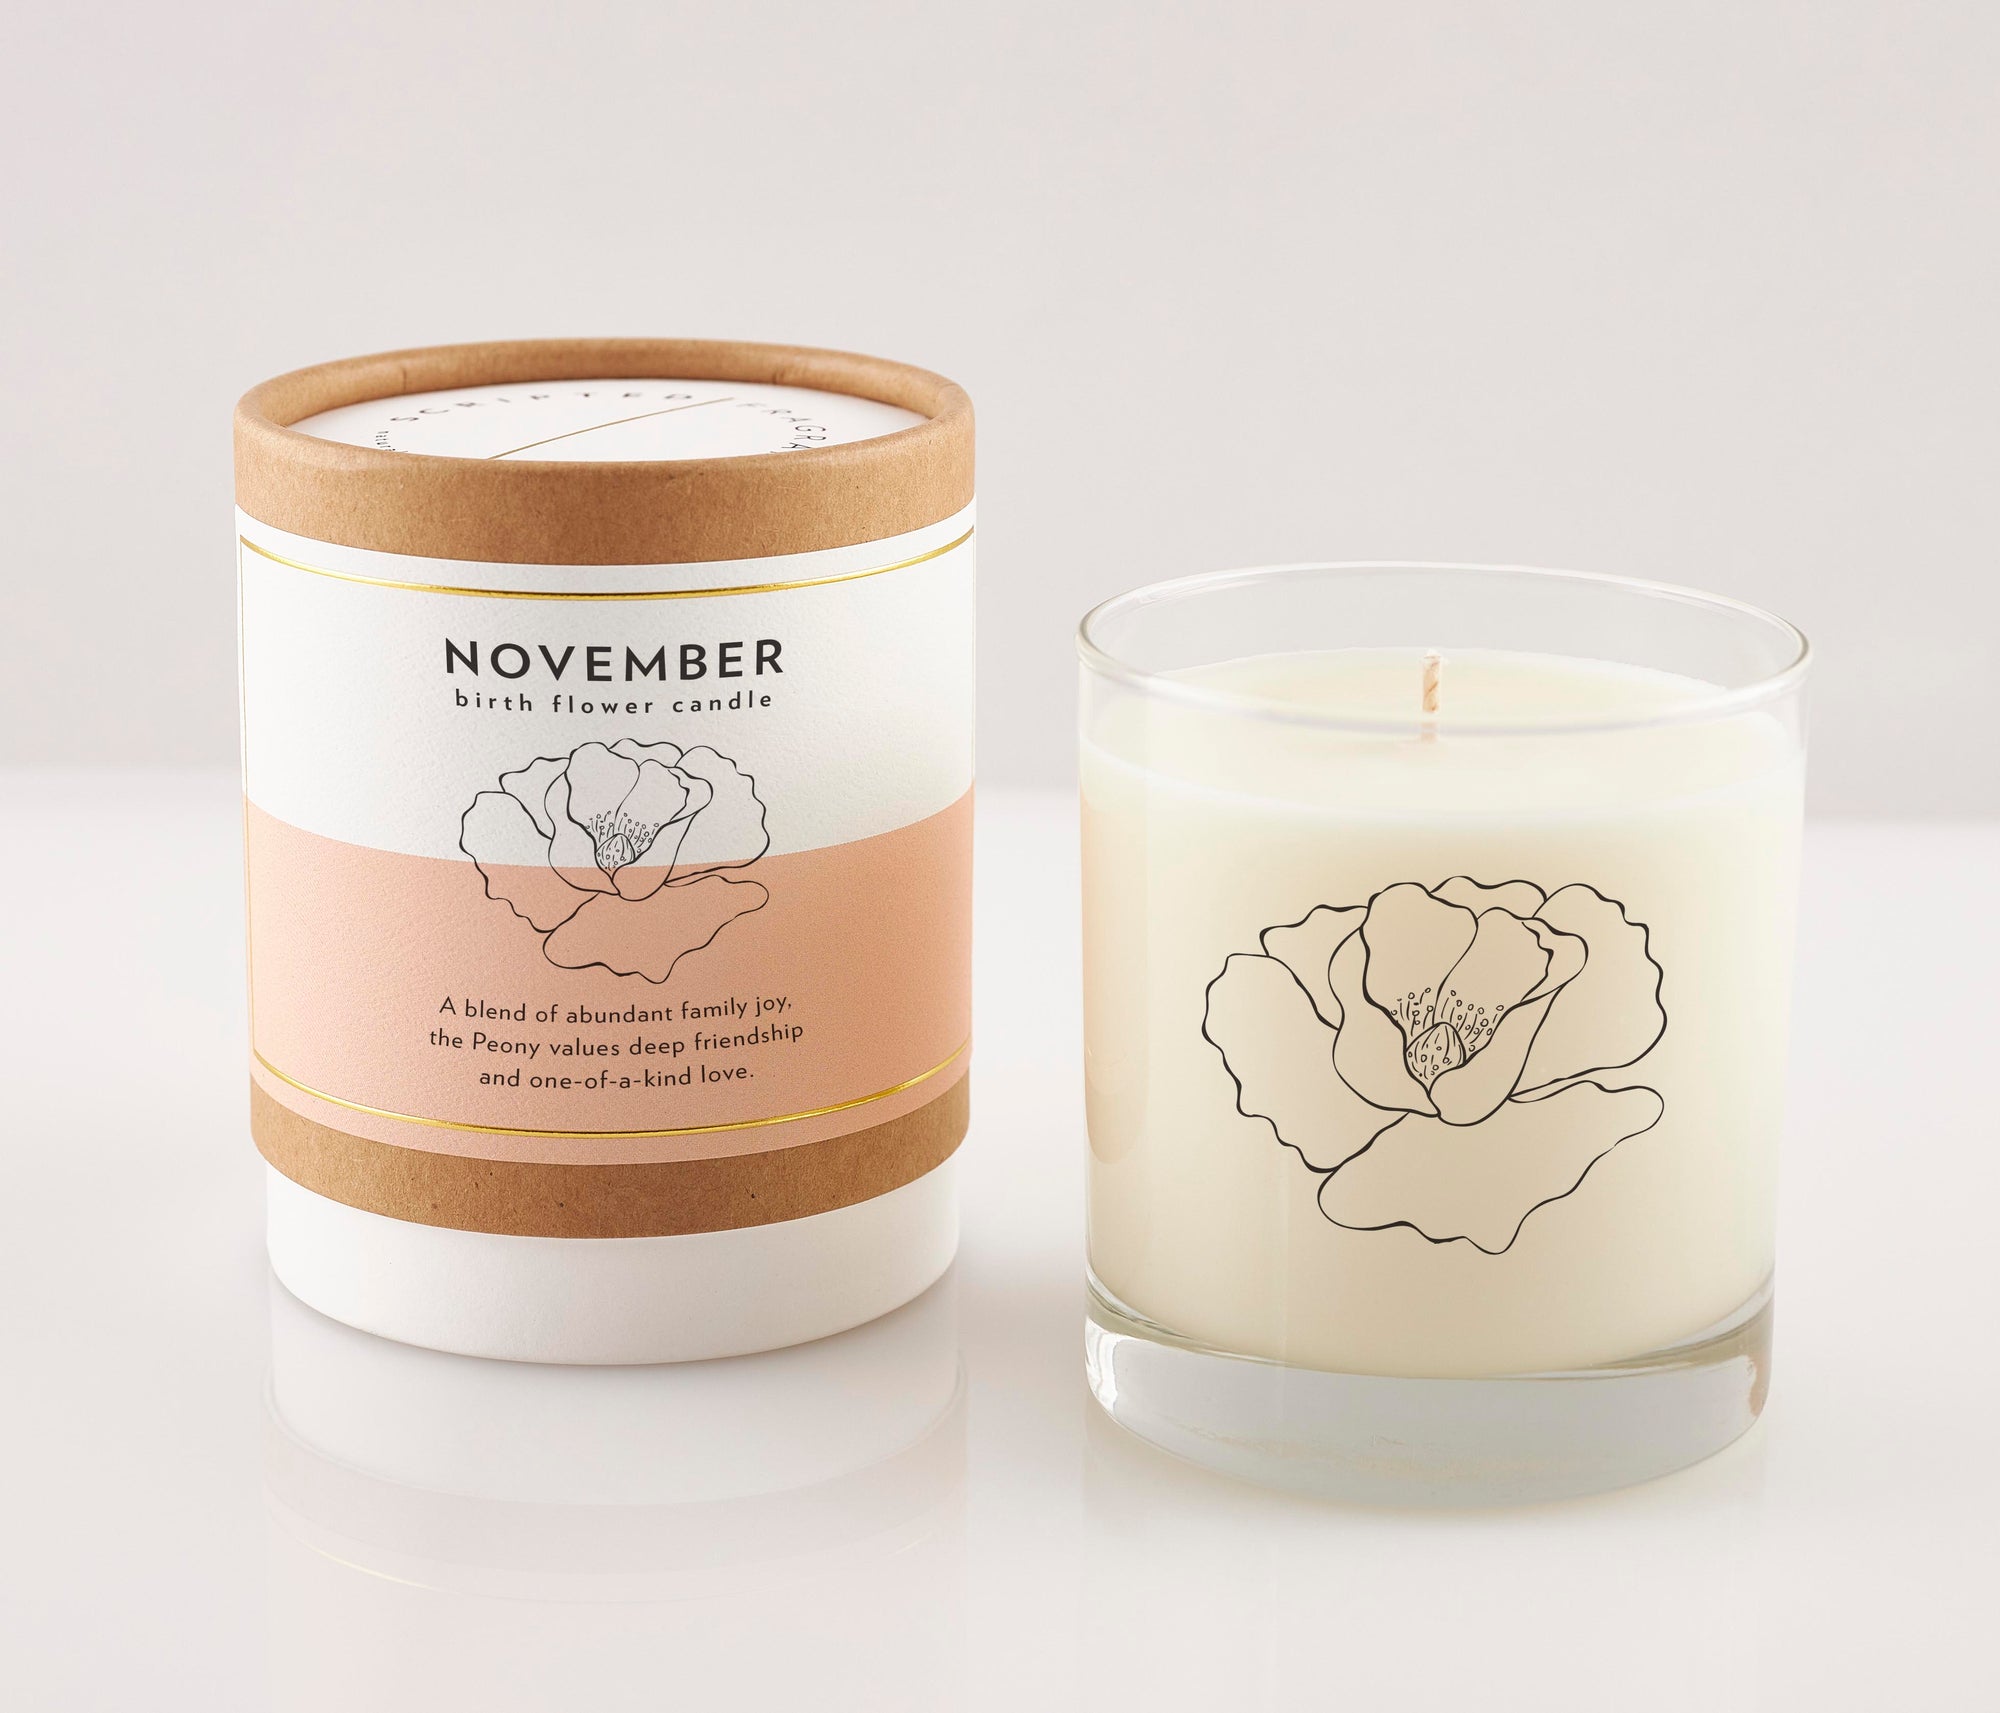 November Birth Month Flower Soy Candle